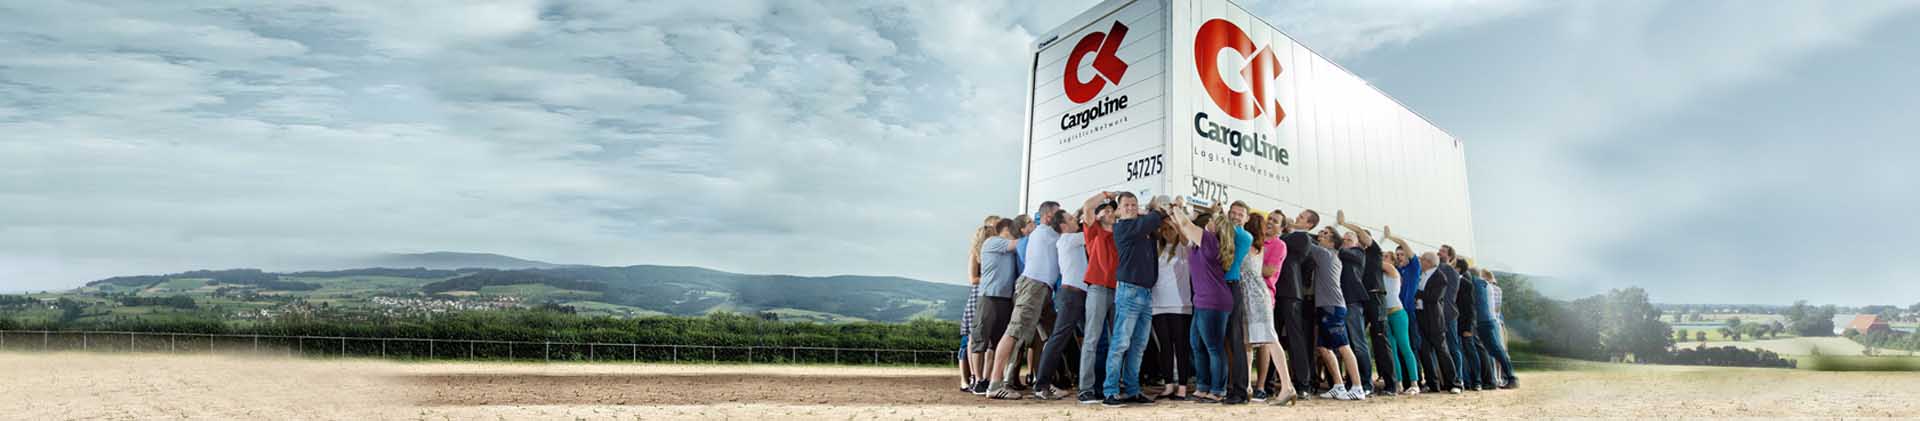 with CargoLine is your logistics in good hands